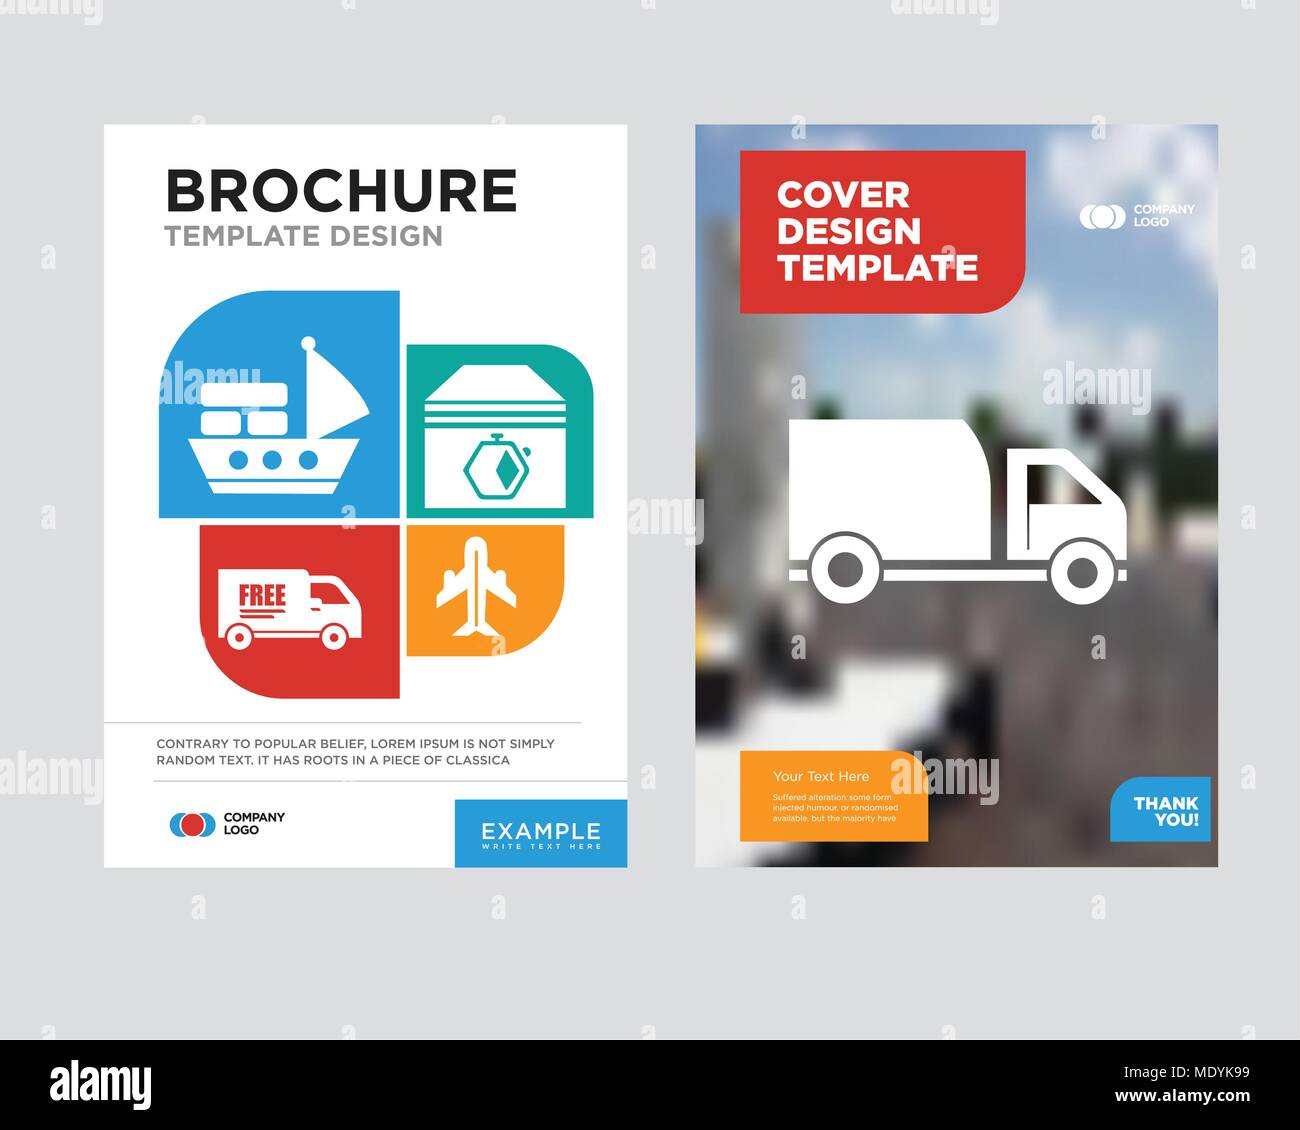 Delivery Truck Brochure Flyer Design Template With Abstract Photo Background Airplane In Vertical Ascending Position Up Arrows Couple Free Delivery Stock Vector Image Art Alamy